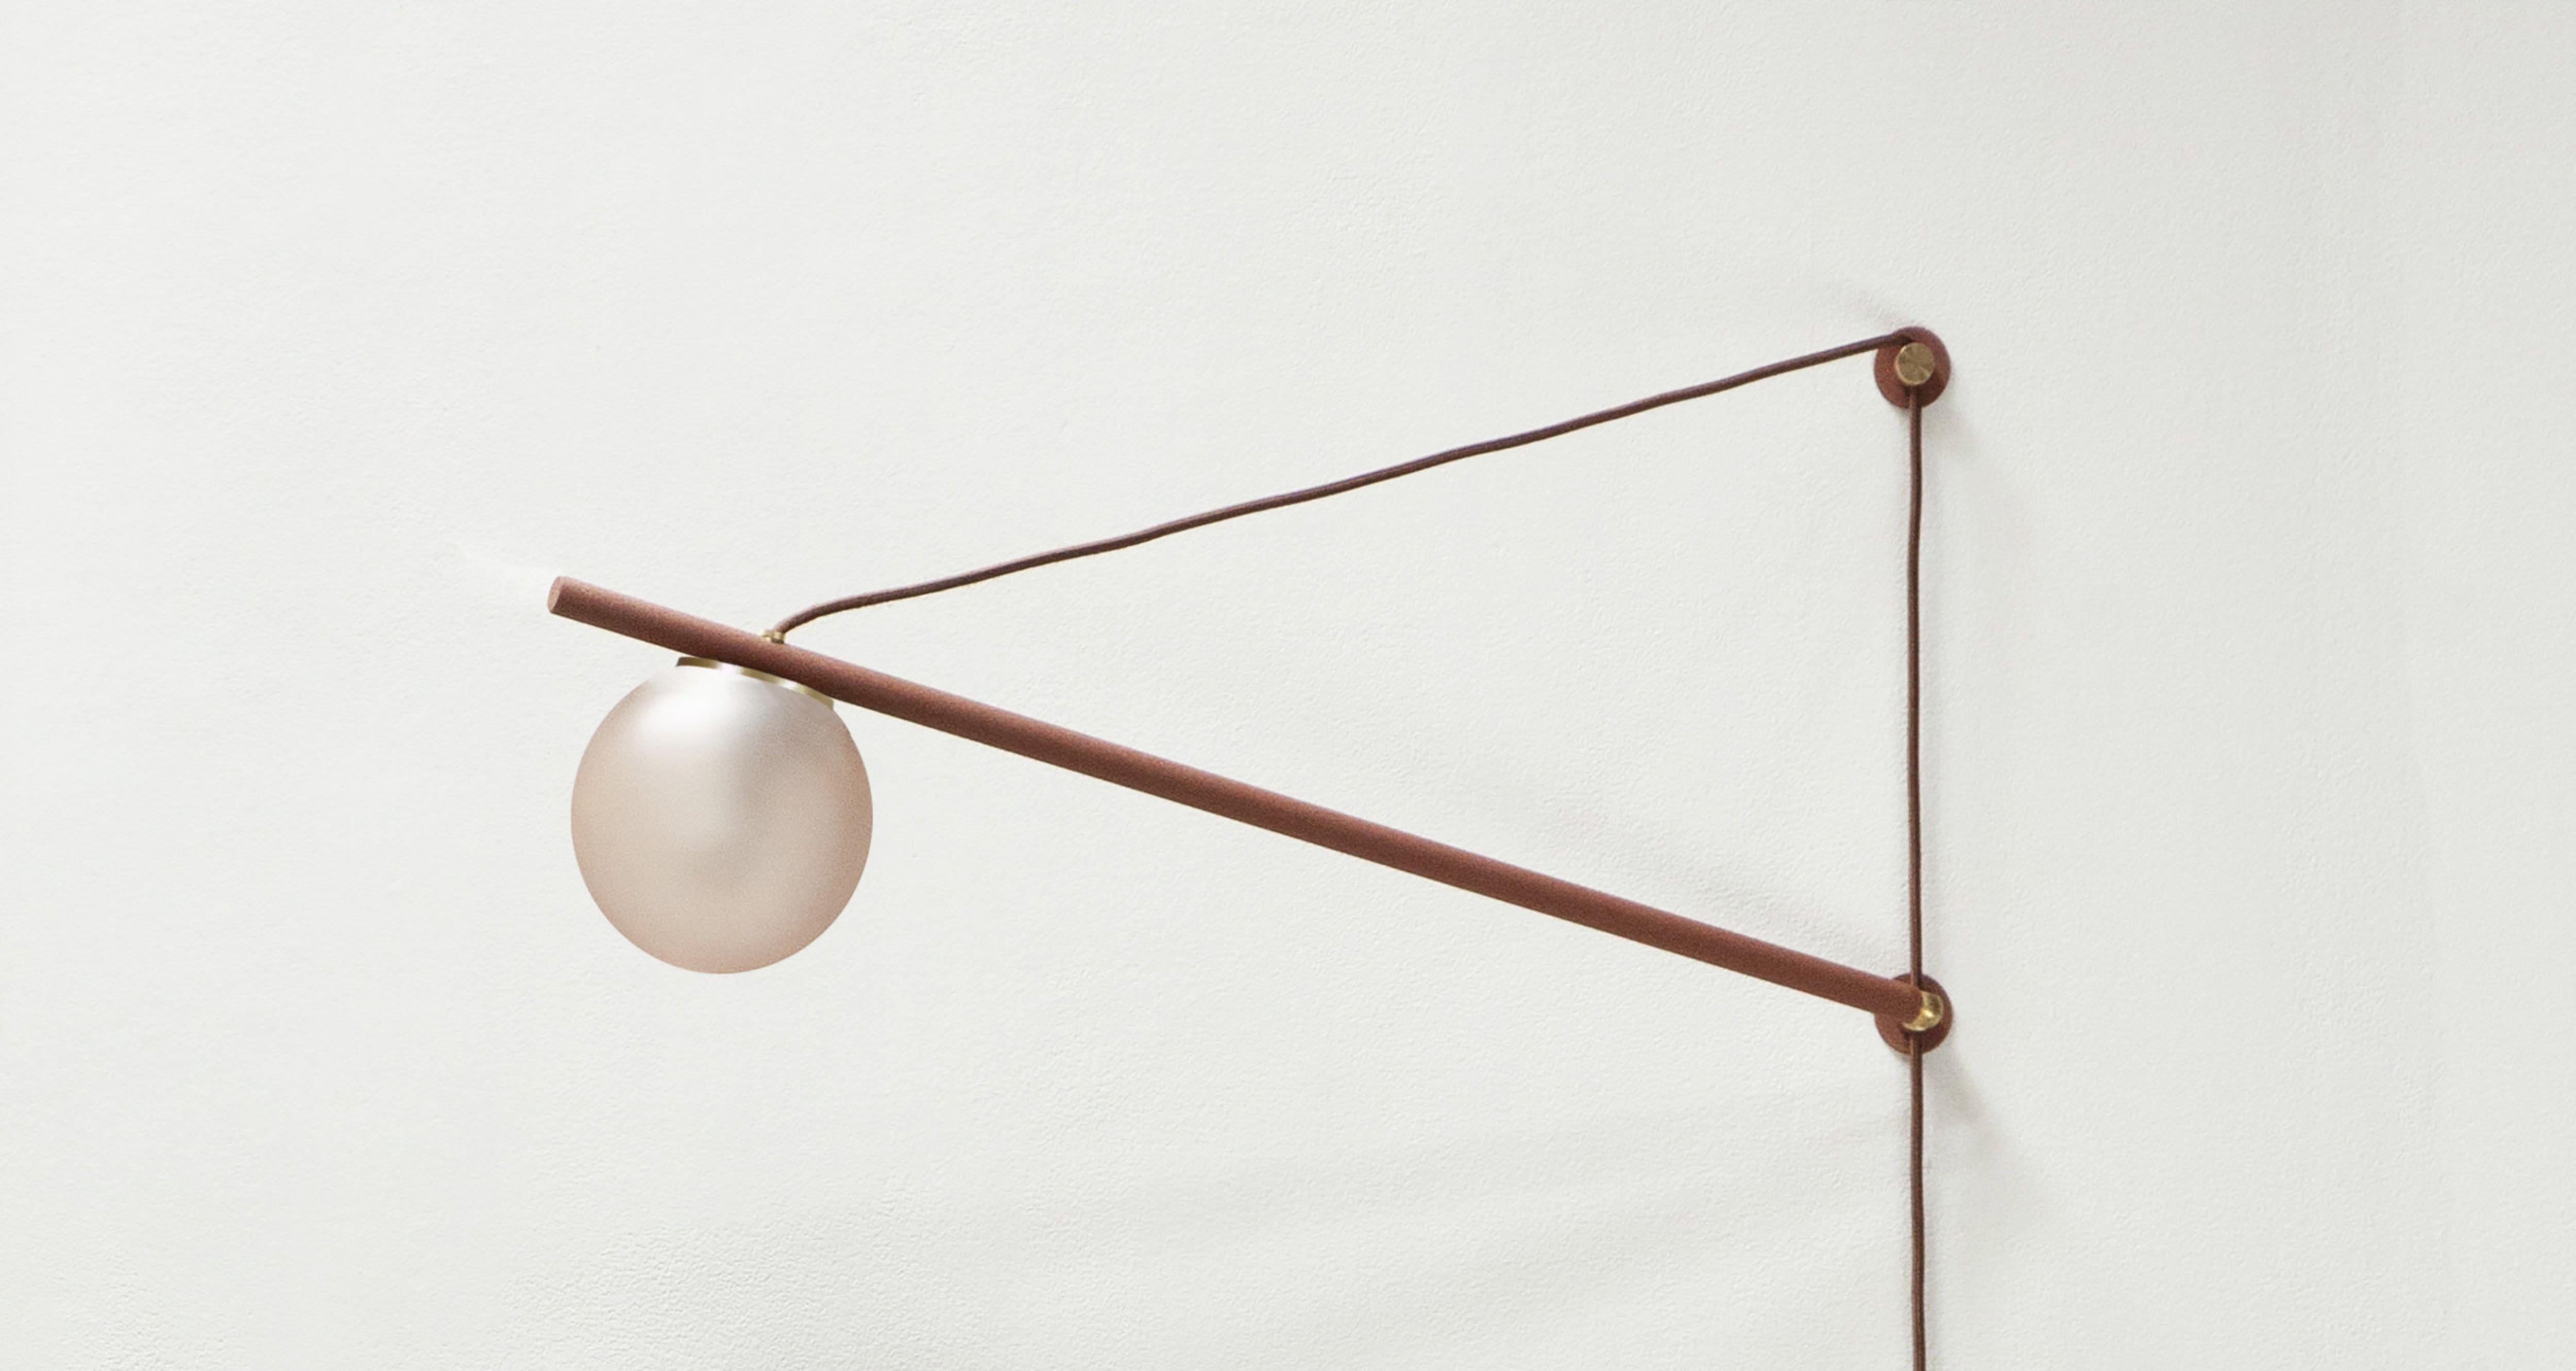 Small ISO sconce light by Ladies & Gentlemen Studio
Dimensions: H 17” x W 30”, 6” globe
Materials: Powder-coated steel (also available in brass), fabric cord, color washed acid etched glass globe. 
Colors: Brushed brass with pine cord, rust, fog